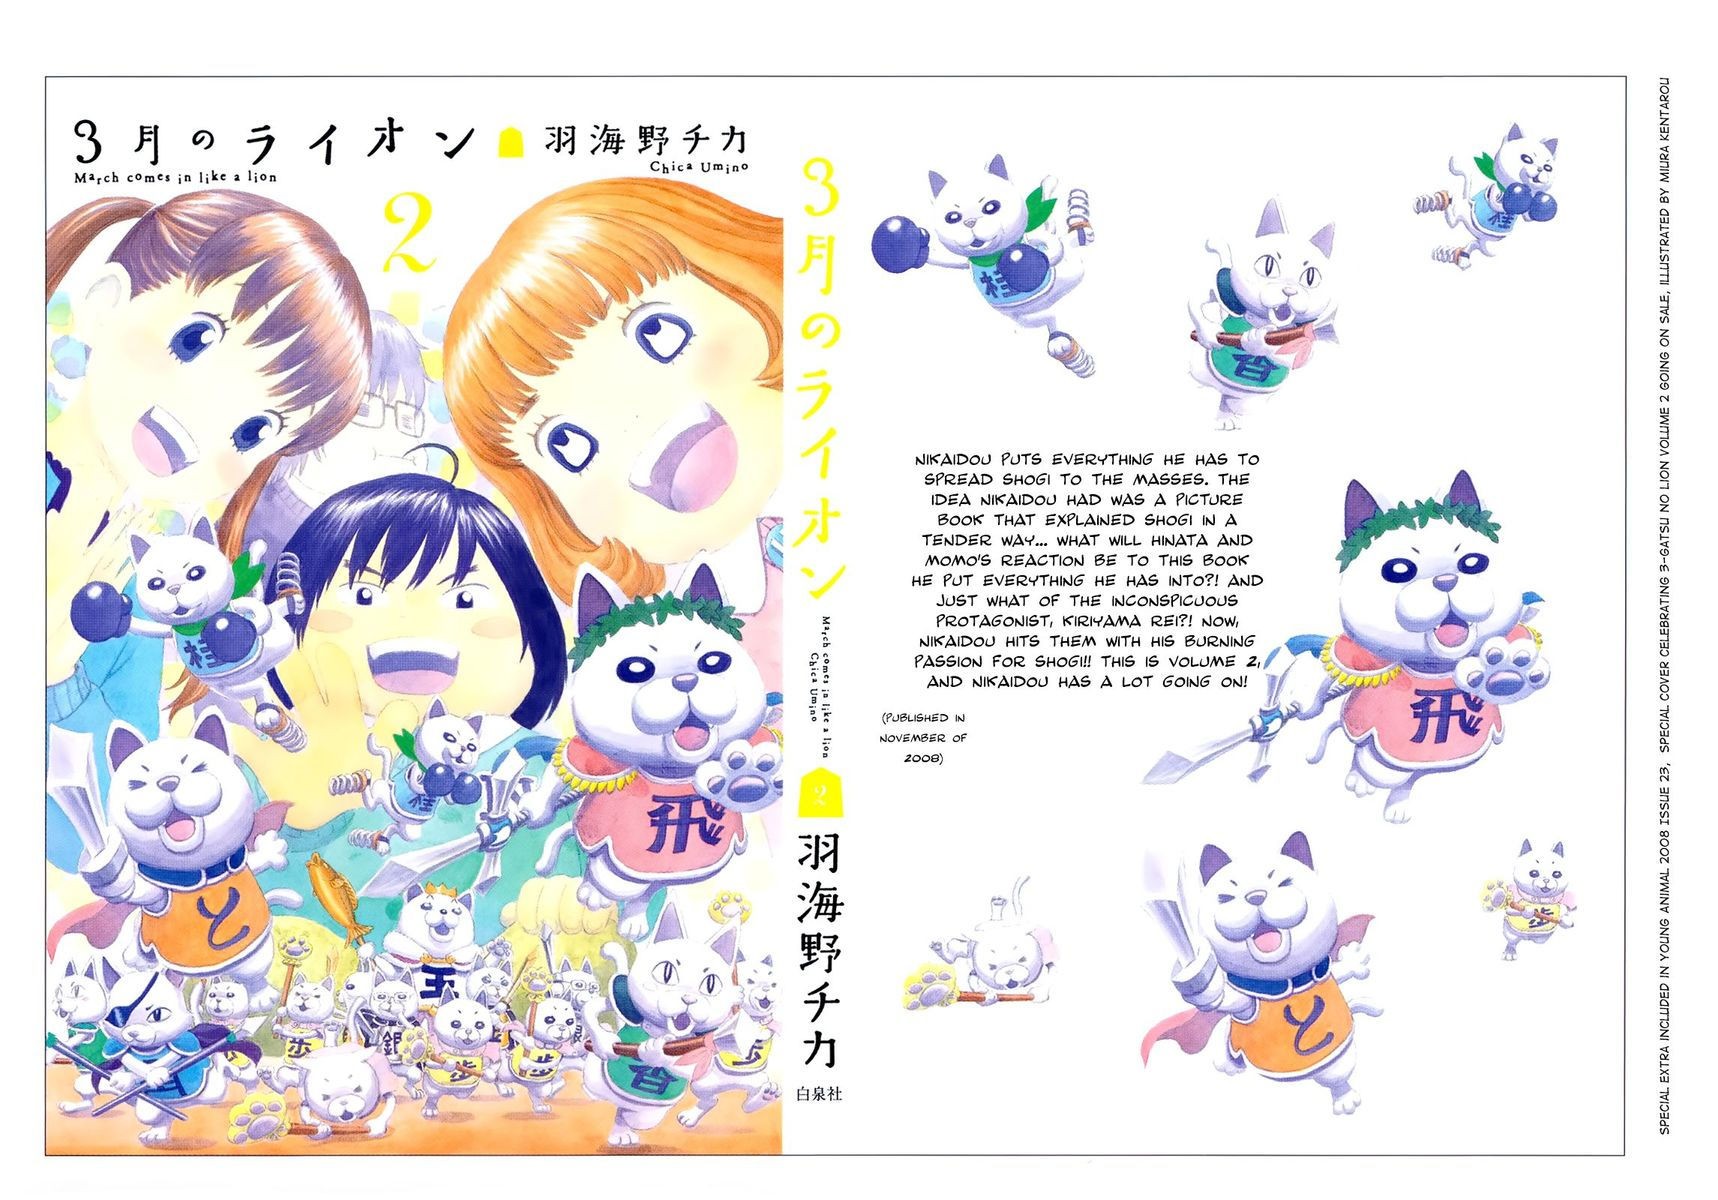 March Comes in Like a Lion, Chapter 114.6 Vol 11 Extra (EN) image 11